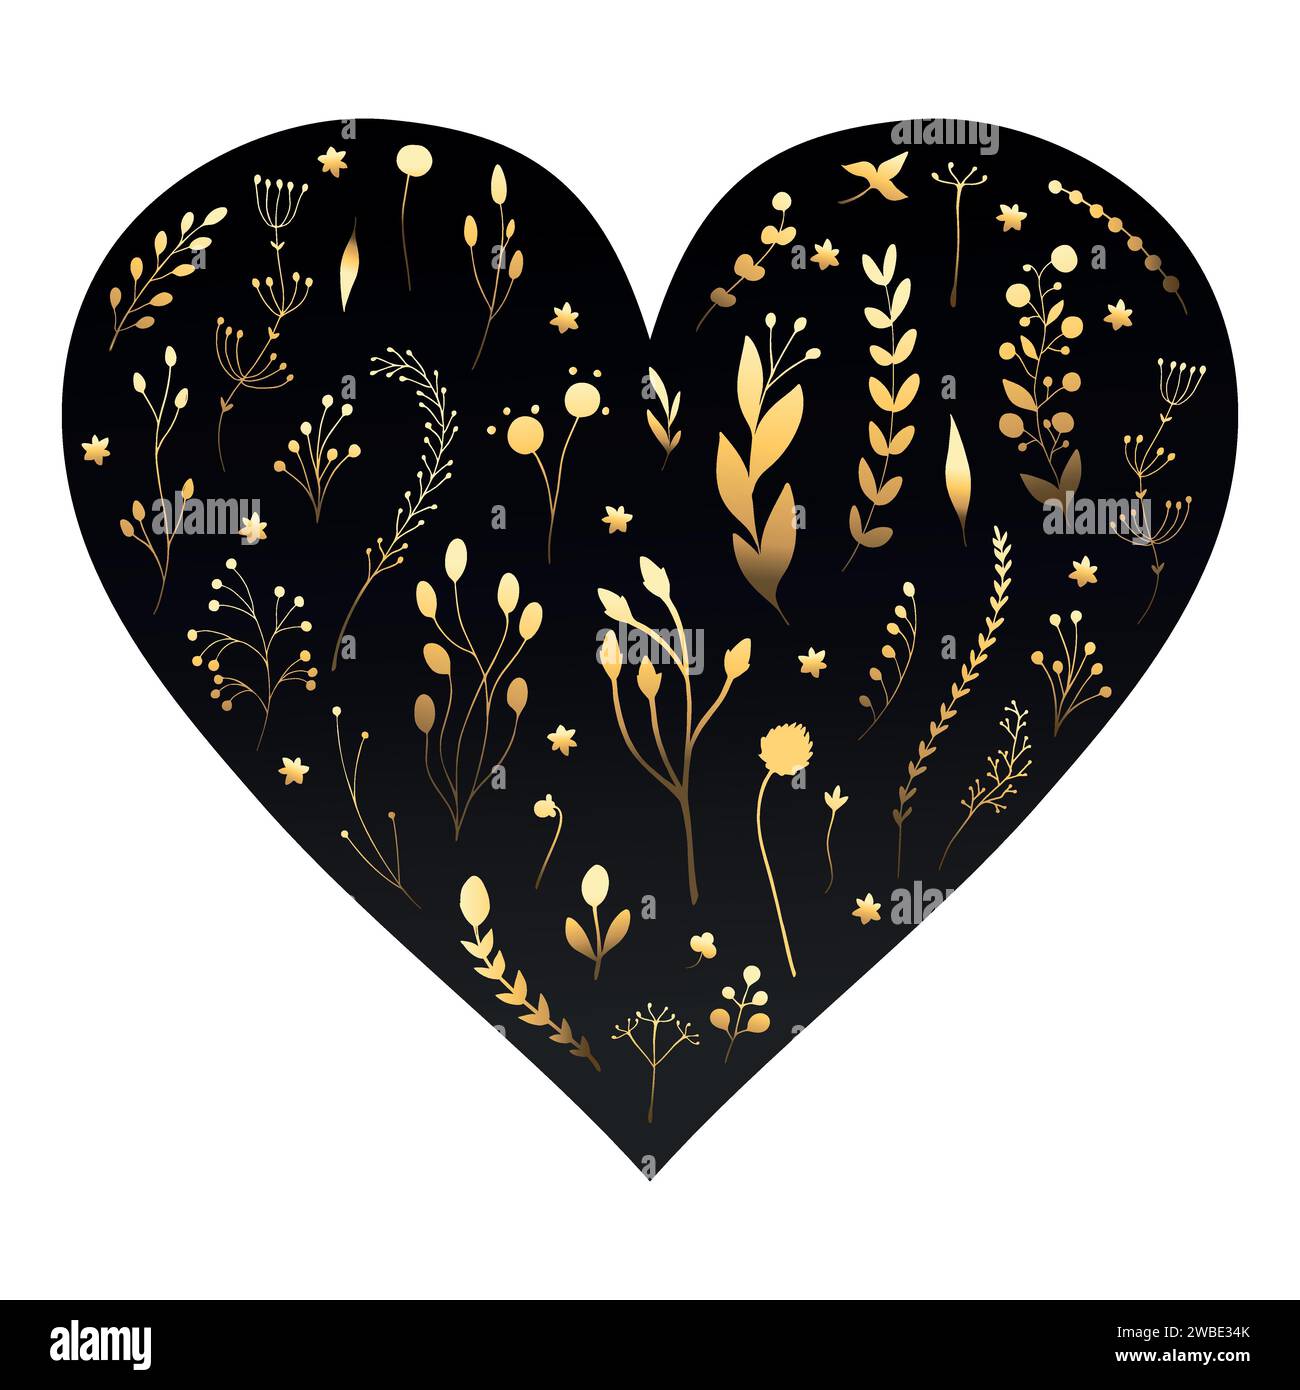 Heart template decorated with gold colored plants. Heart with floral arrangement. Vector illustration Stock Vector